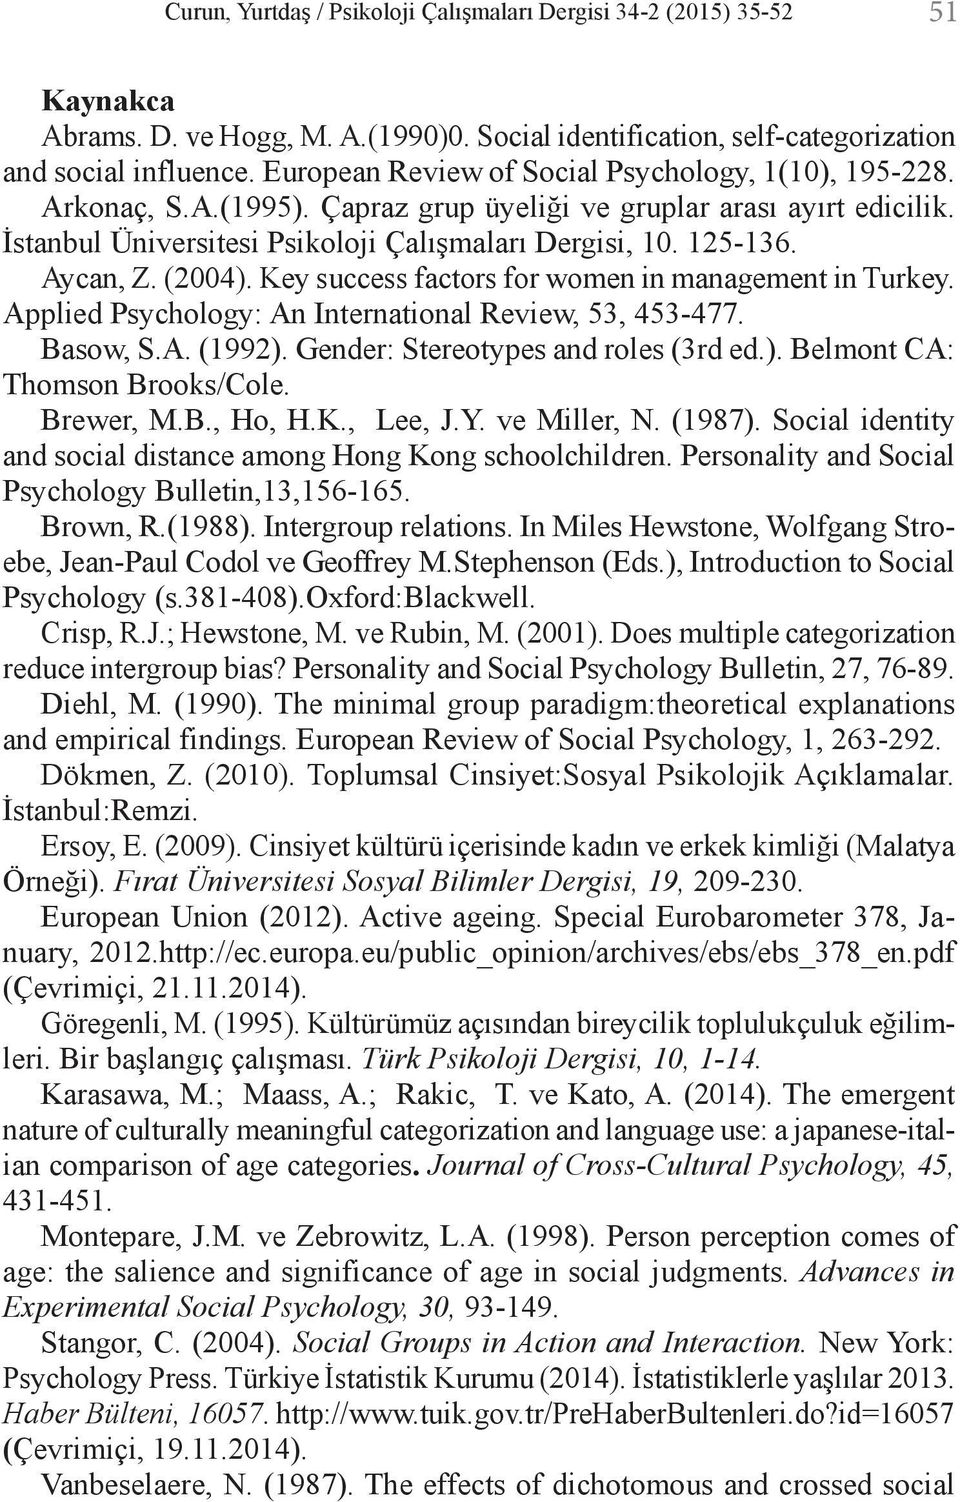 Aycan, Z. (2004). Key success factors for women in management in Turkey. Applied Psychology: An International Review, 53, 453-477. Basow, S.A. (1992). Gender: Stereotypes and roles (3rd ed.). Belmont CA: Thomson Brooks/Cole.